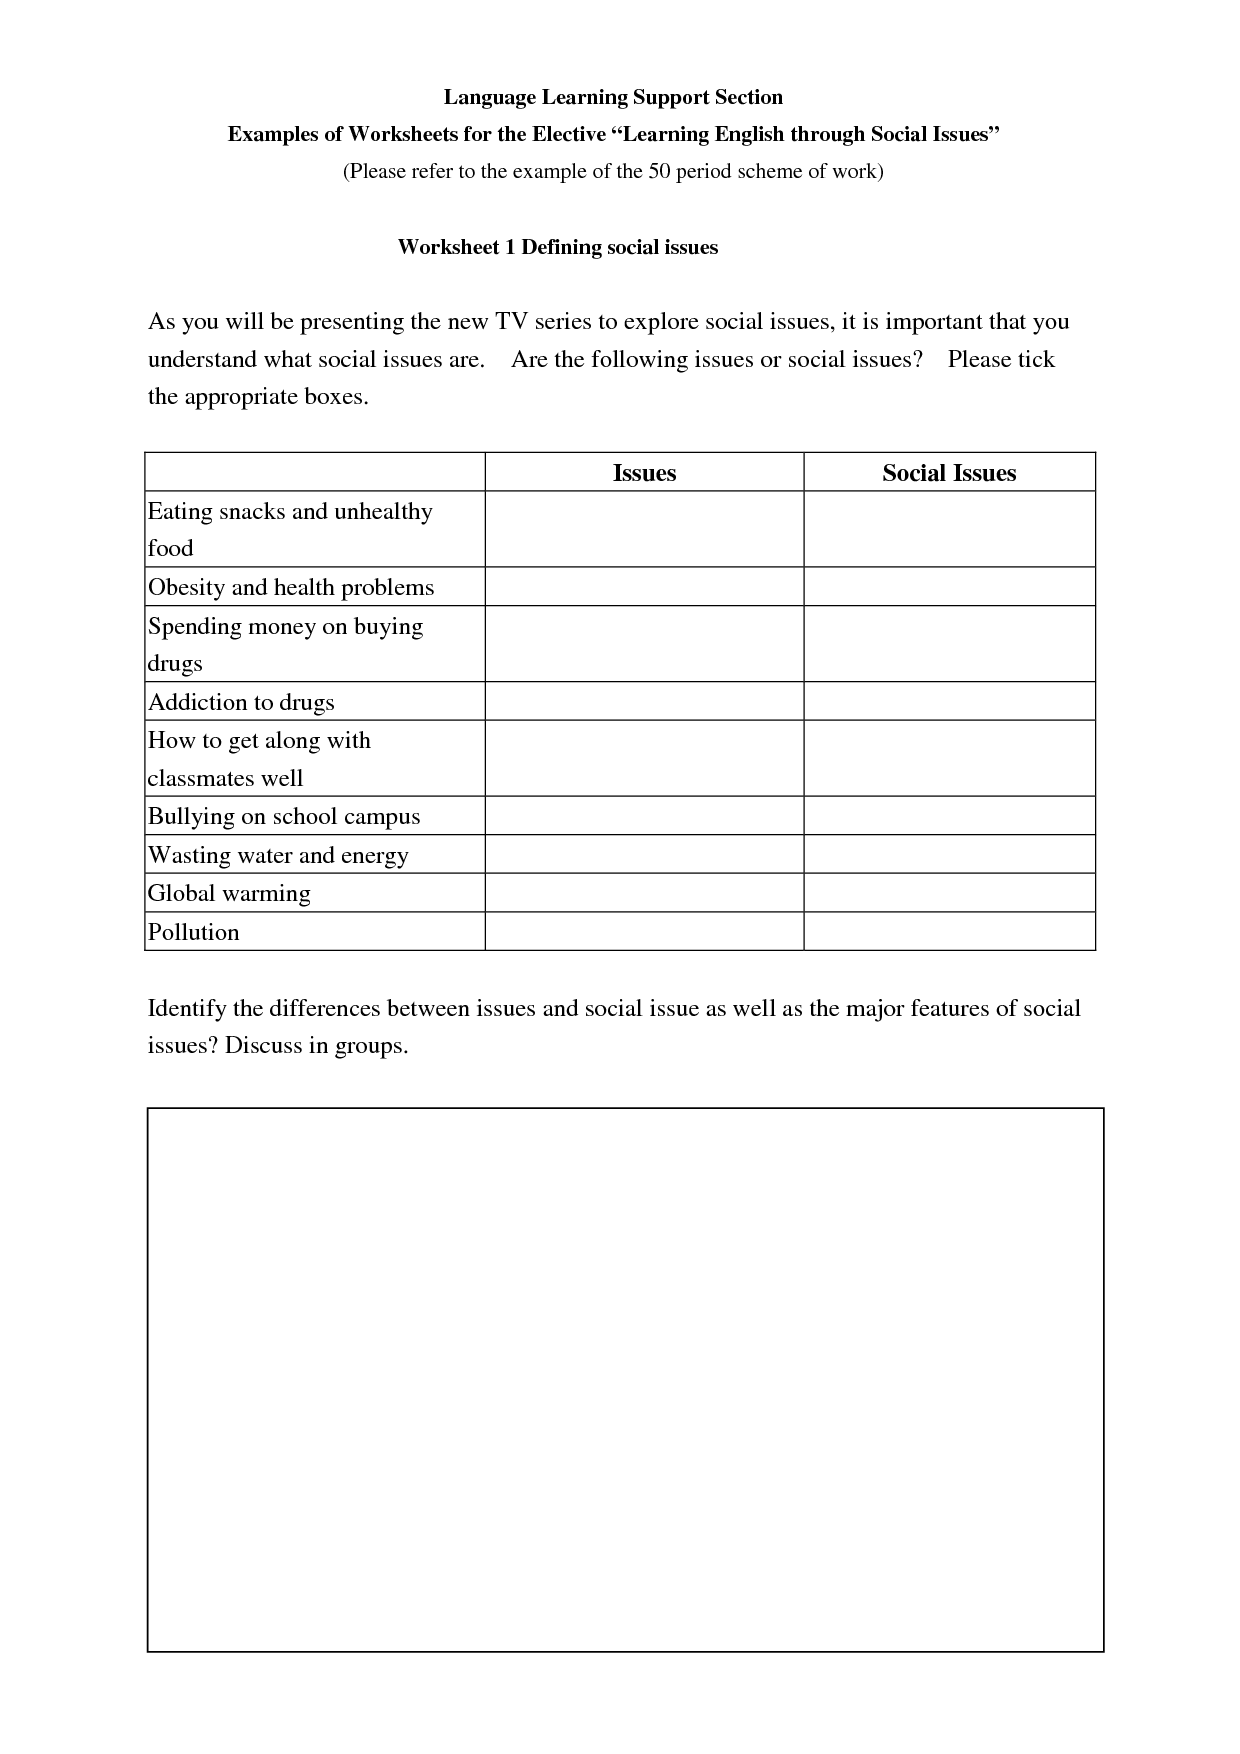 improve-your-english-worksheet-free-esl-printable-worksheets-made-by-teachers-english